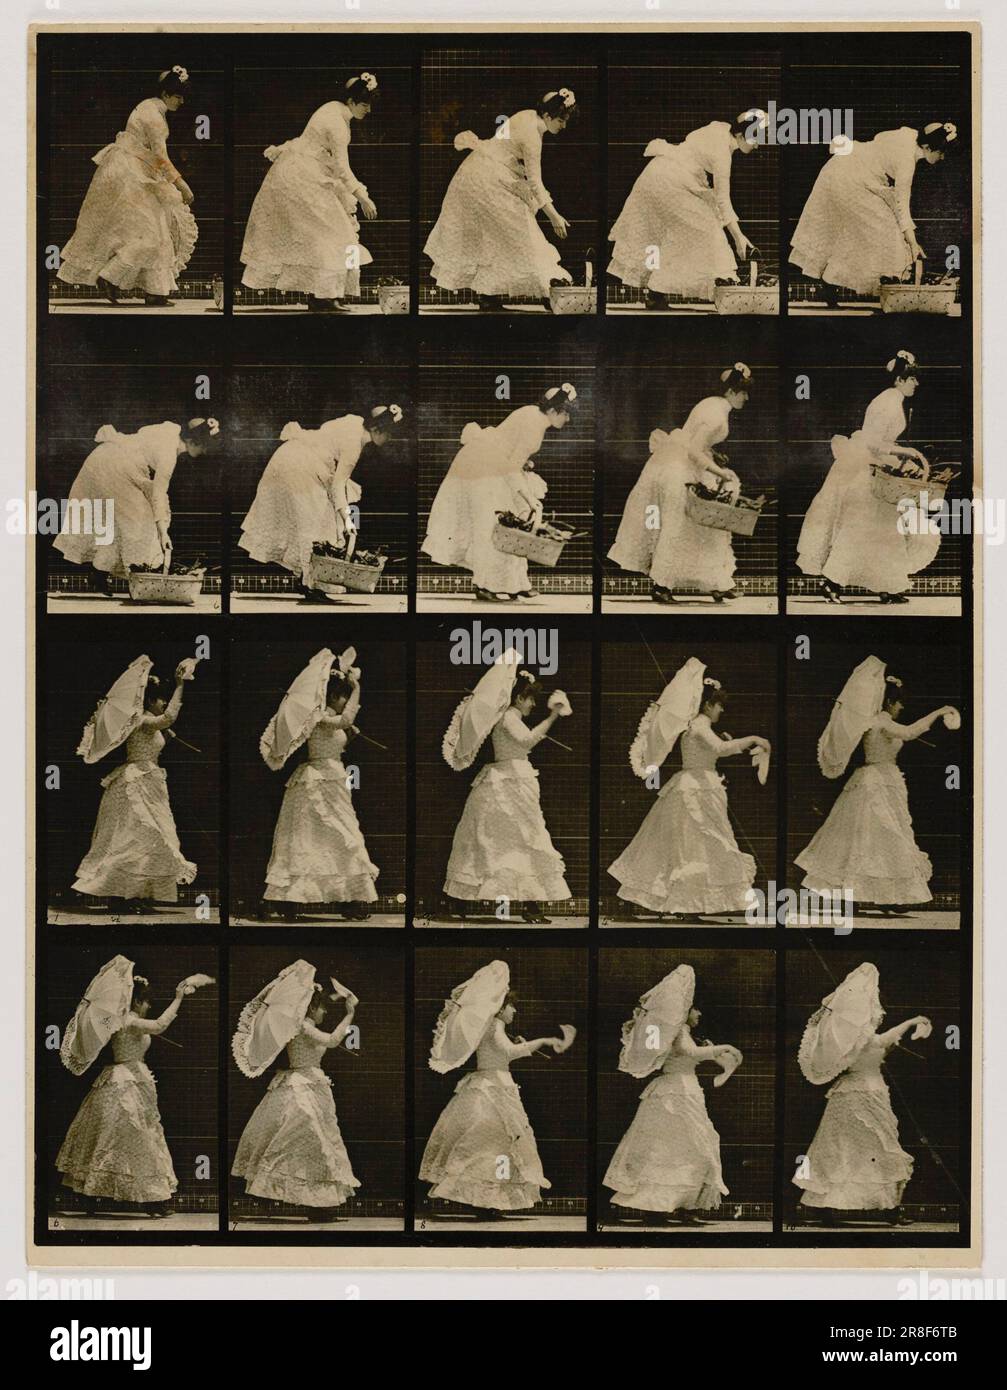 Woman Lifting a Basket, Waving a Handkerchief, from the book Animal Locomotion ca. 1887 by Eadweard Muybridge, born Kingston-upon-Thames, England 1830-died Kingston-upon-Thames, England 1904 Stock Photo